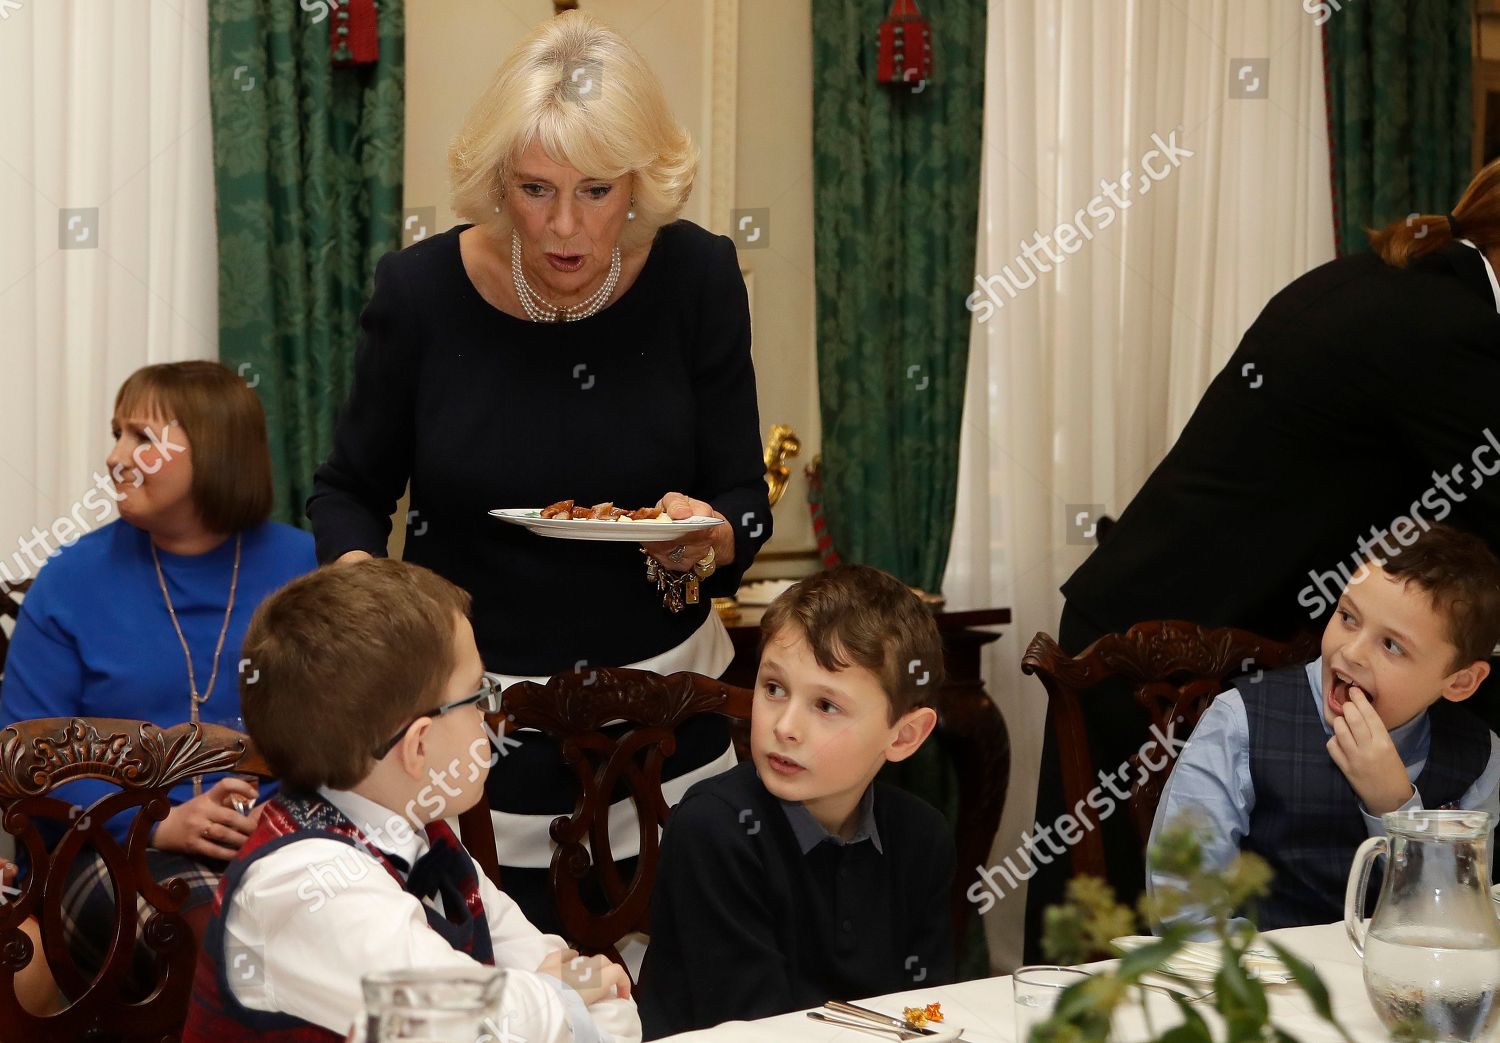 children-attend-a-christmas-event-at-clarence-house-london-uk-shutterstock-editorial-10015343f.jpg